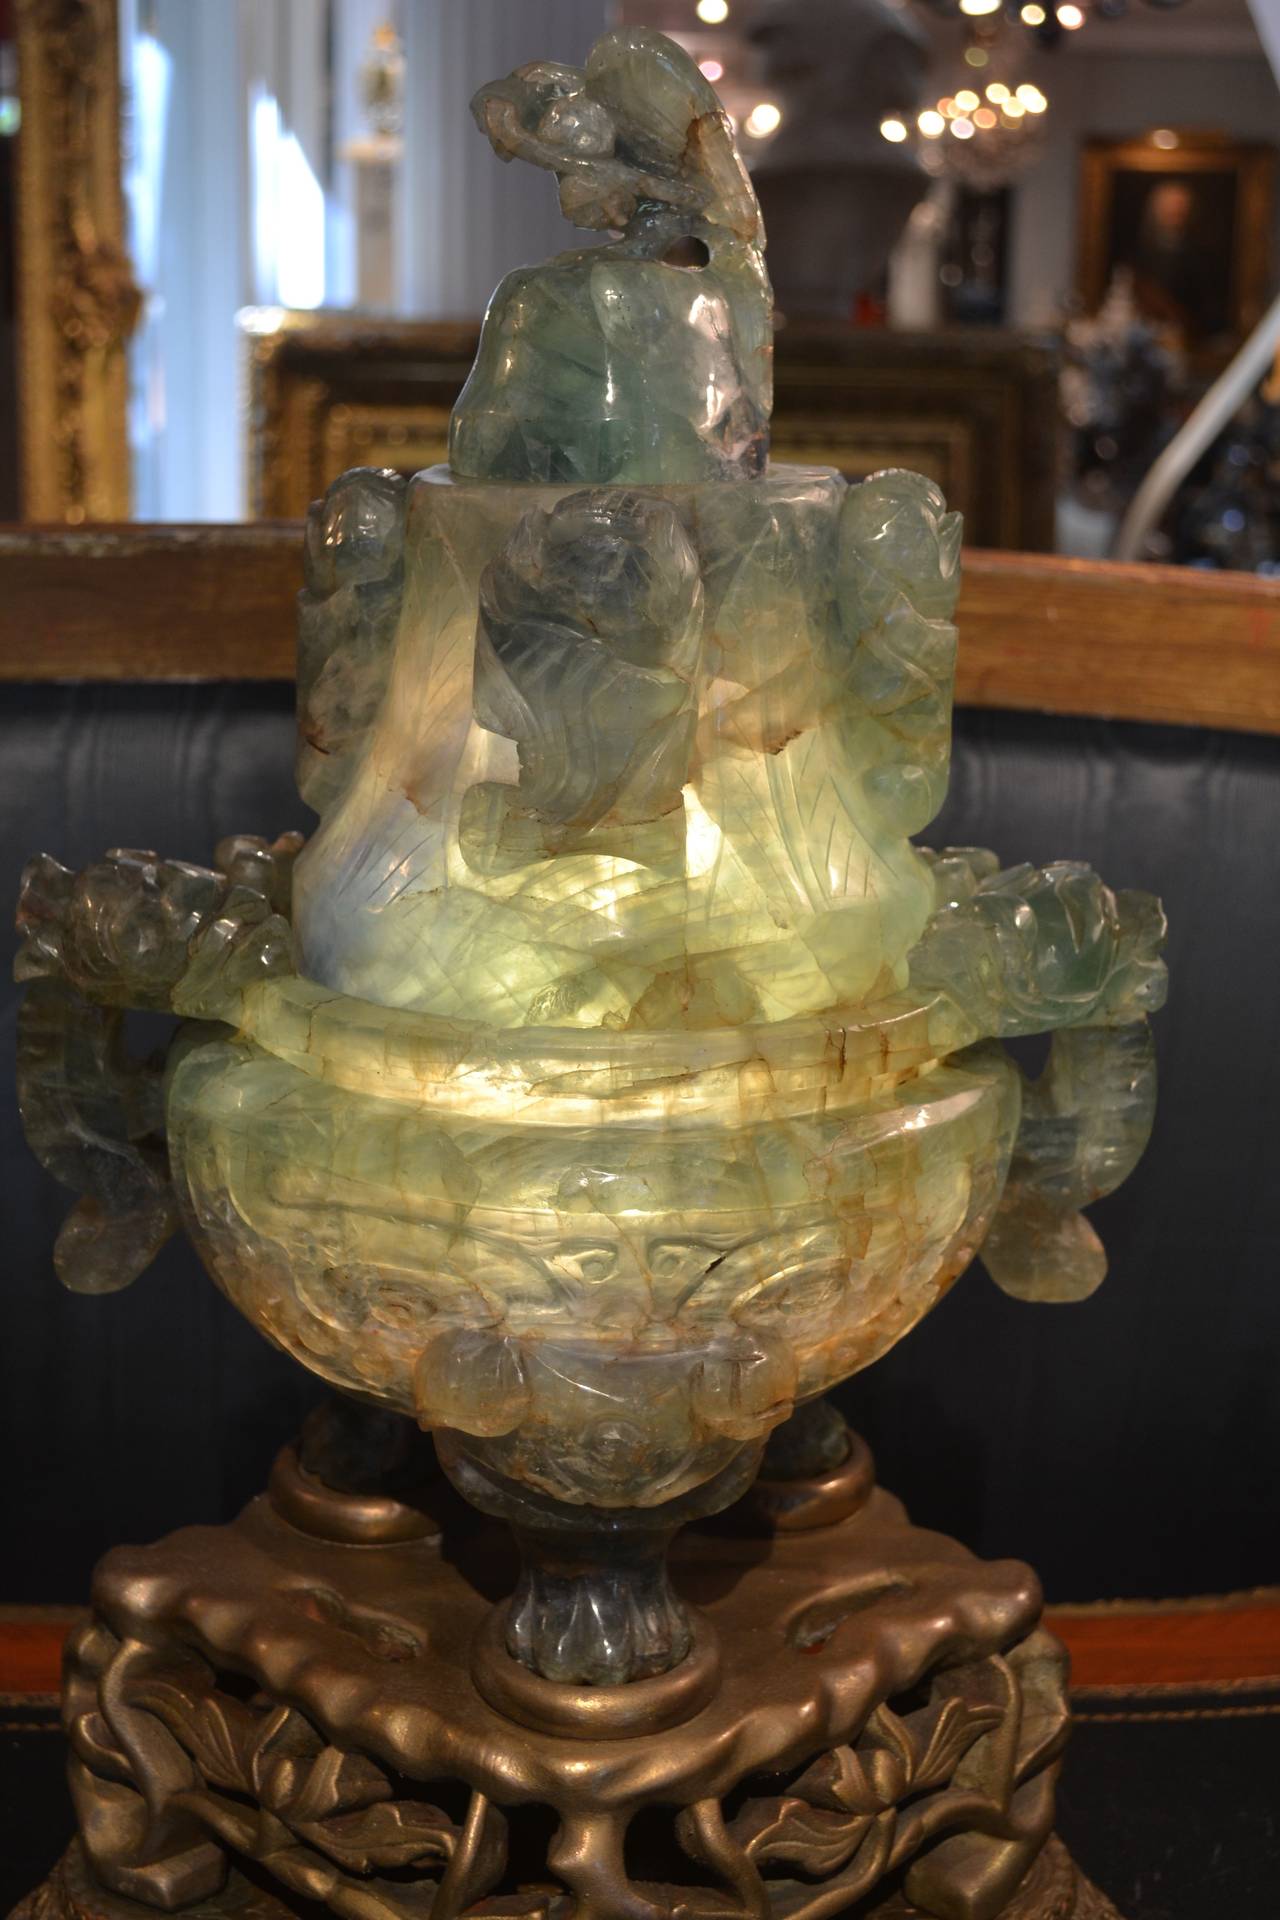 A large and rare sized 'flourite/quartz' lamp, well carved with overall Asian motives and lit from the inside; mounted on a painted rosewood and gilded metal base. The stone in these types of Chinese carved lamps is often referred to as quartz, or